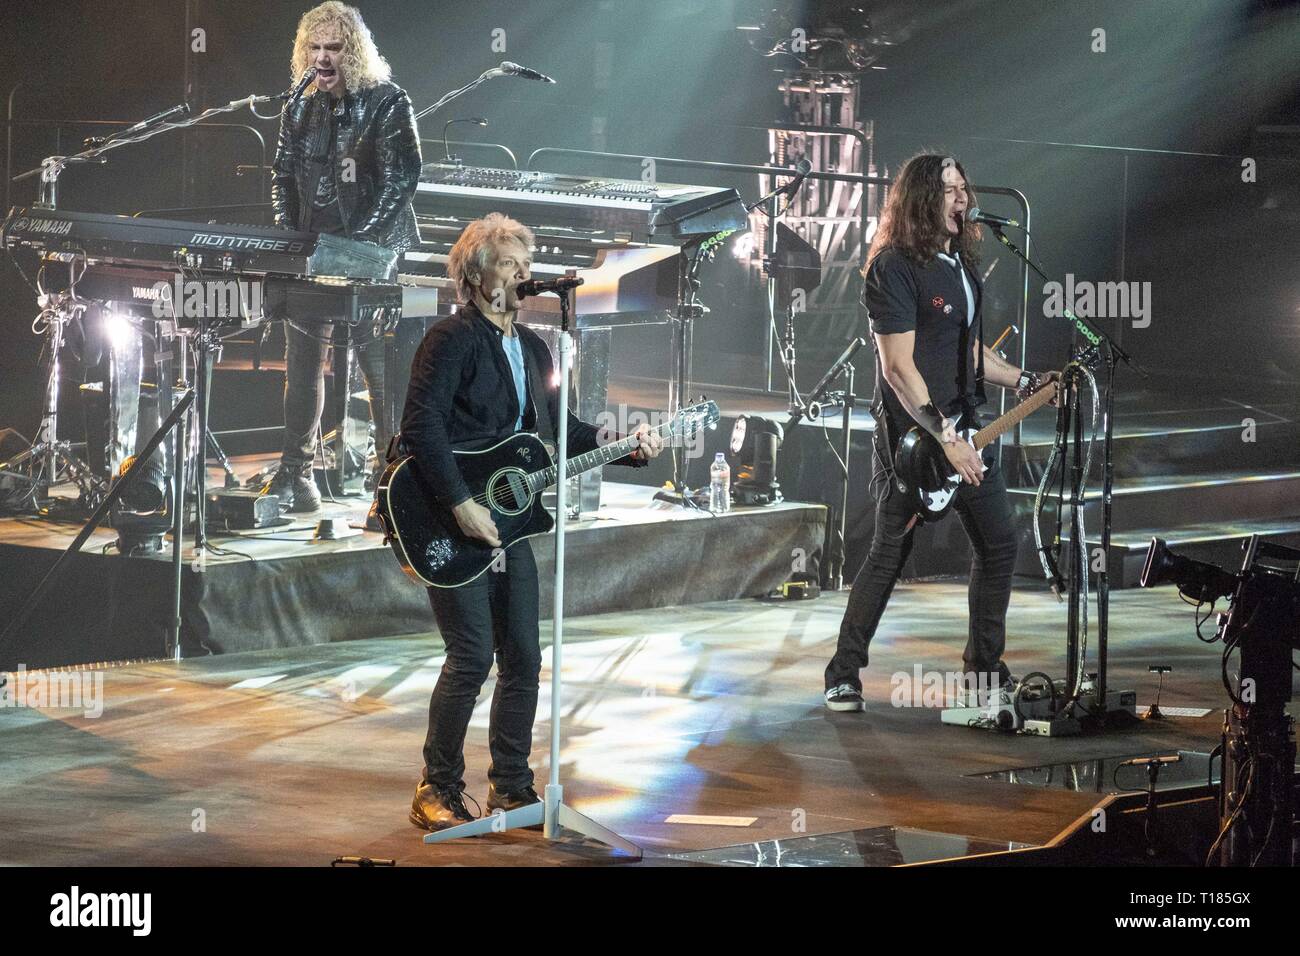 April 29, 2018 - Milwaukee, Wisconsin, U.S - DAVID BRYAN, JON BON JOVI and PHIL X (PHIL XENIDIS) of Bon Jovi during the This House Is Not For Sale tour at the Bradley Center in Milwaukee, Wisconsin (Credit Image: © Daniel DeSlover/ZUMA Wire) Stock Photo